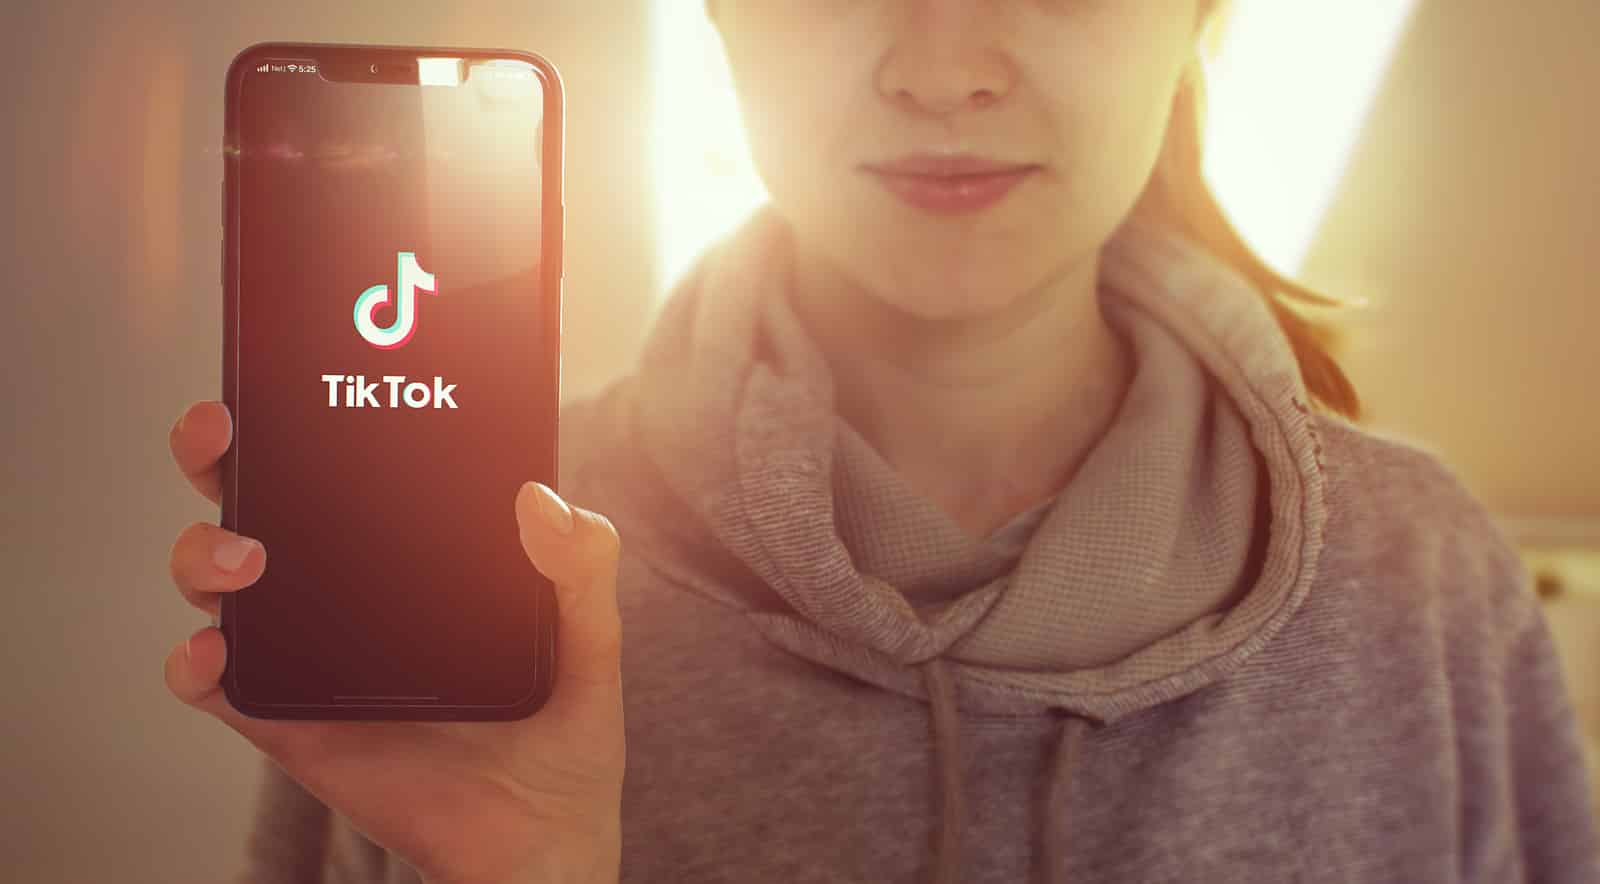 Who Has the Most Followers on TikTok 2022